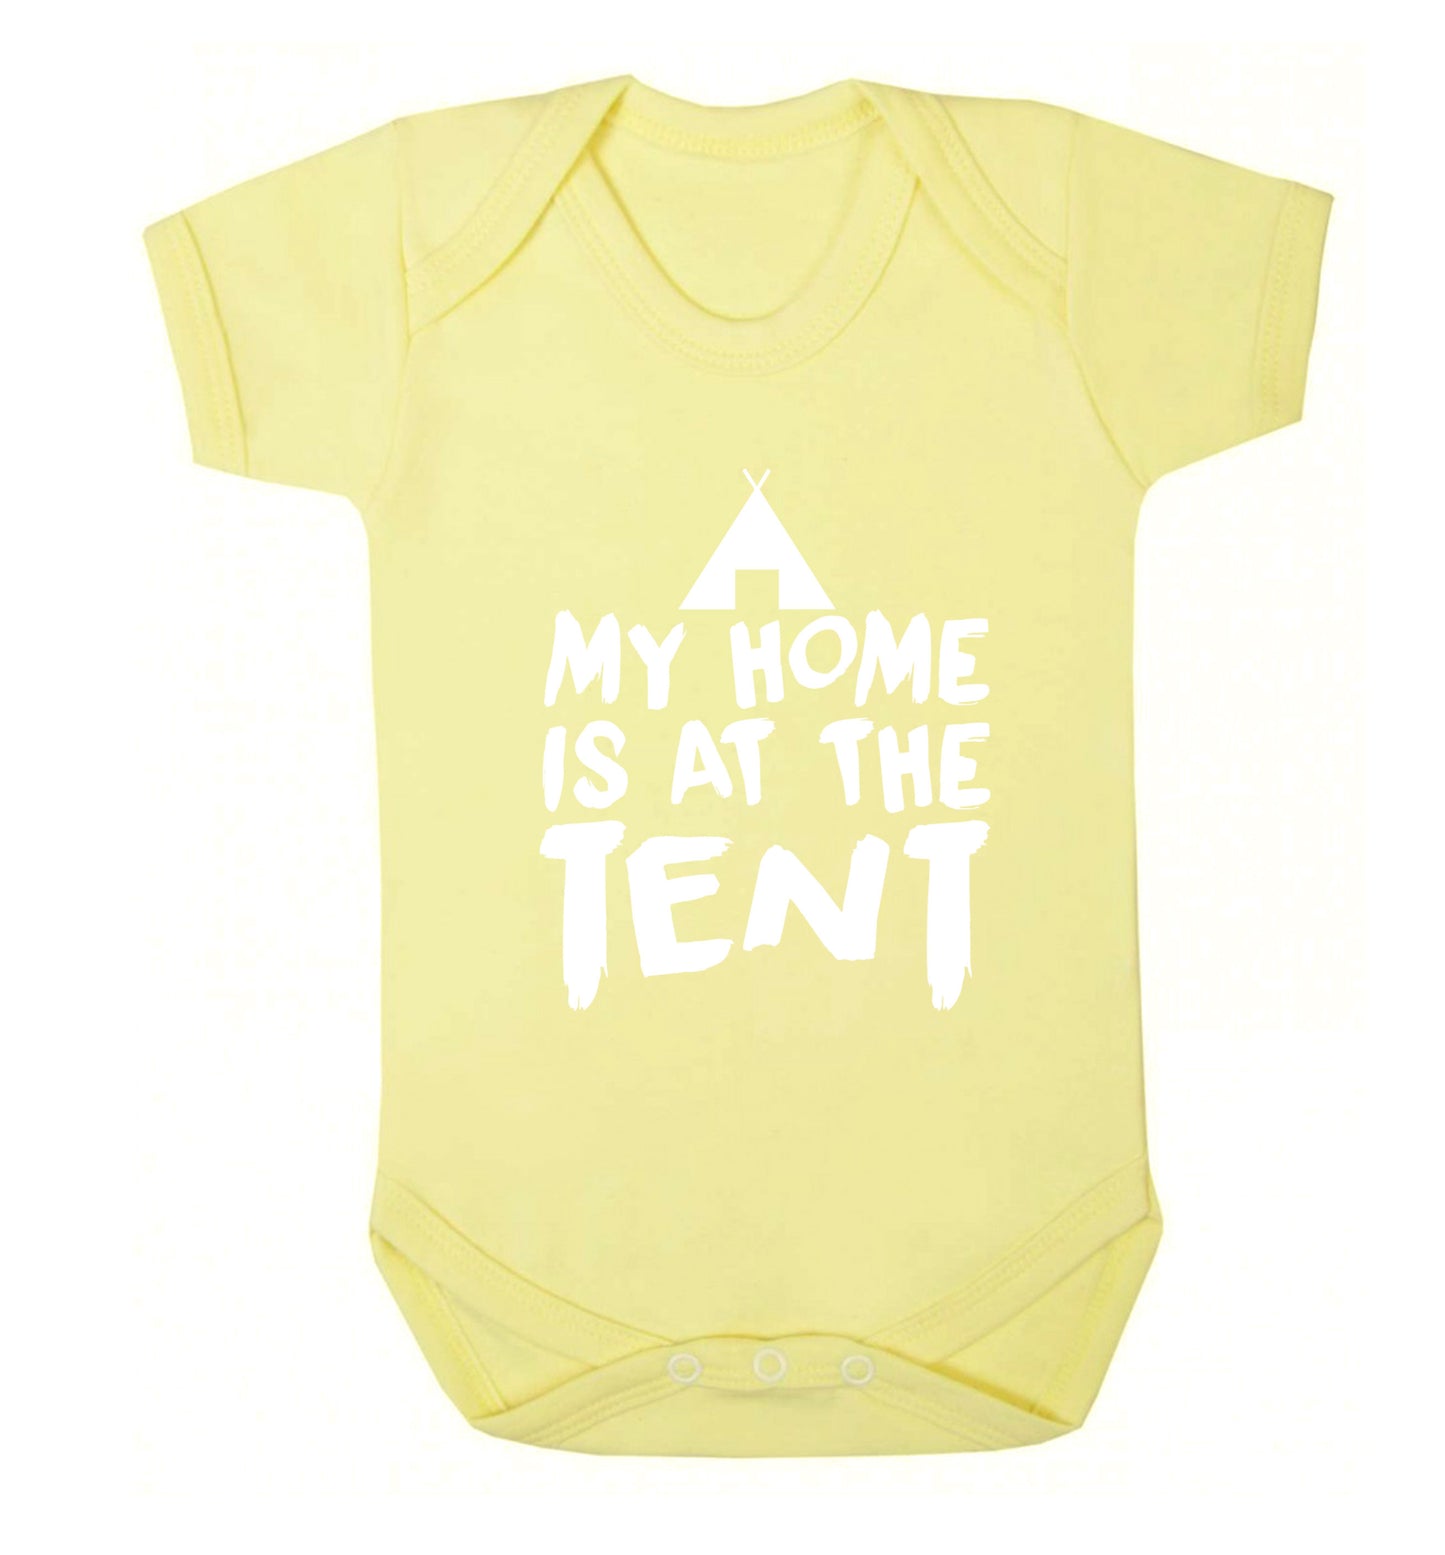 My home is at the tent Baby Vest pale yellow 18-24 months